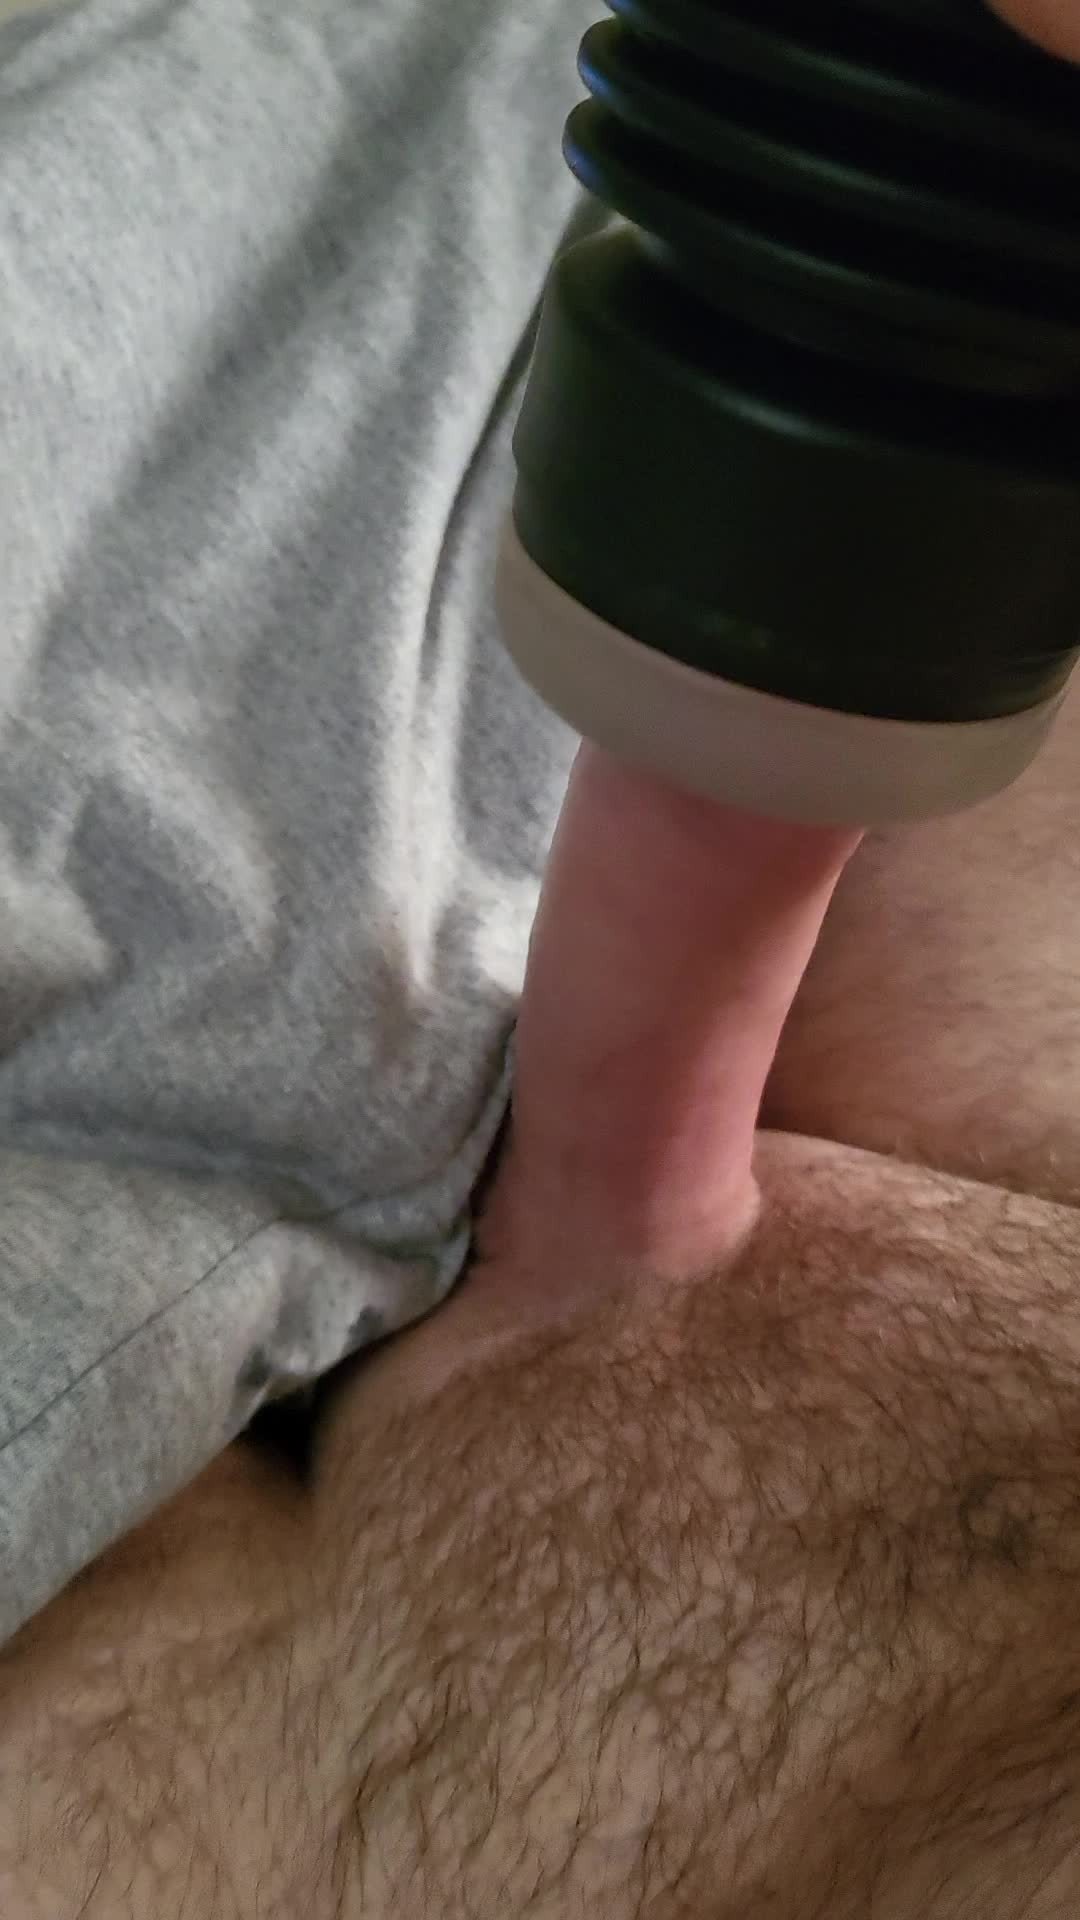 Video by Bi Biker Bryan with the username @Bryan199102, who is a verified user,  August 19, 2022 at 11:53 AM. The post is about the topic Big Cock Lovers and the text says 'Had to put this somewhere while scrolling through sharesome this morning!
Where should I put it next?'